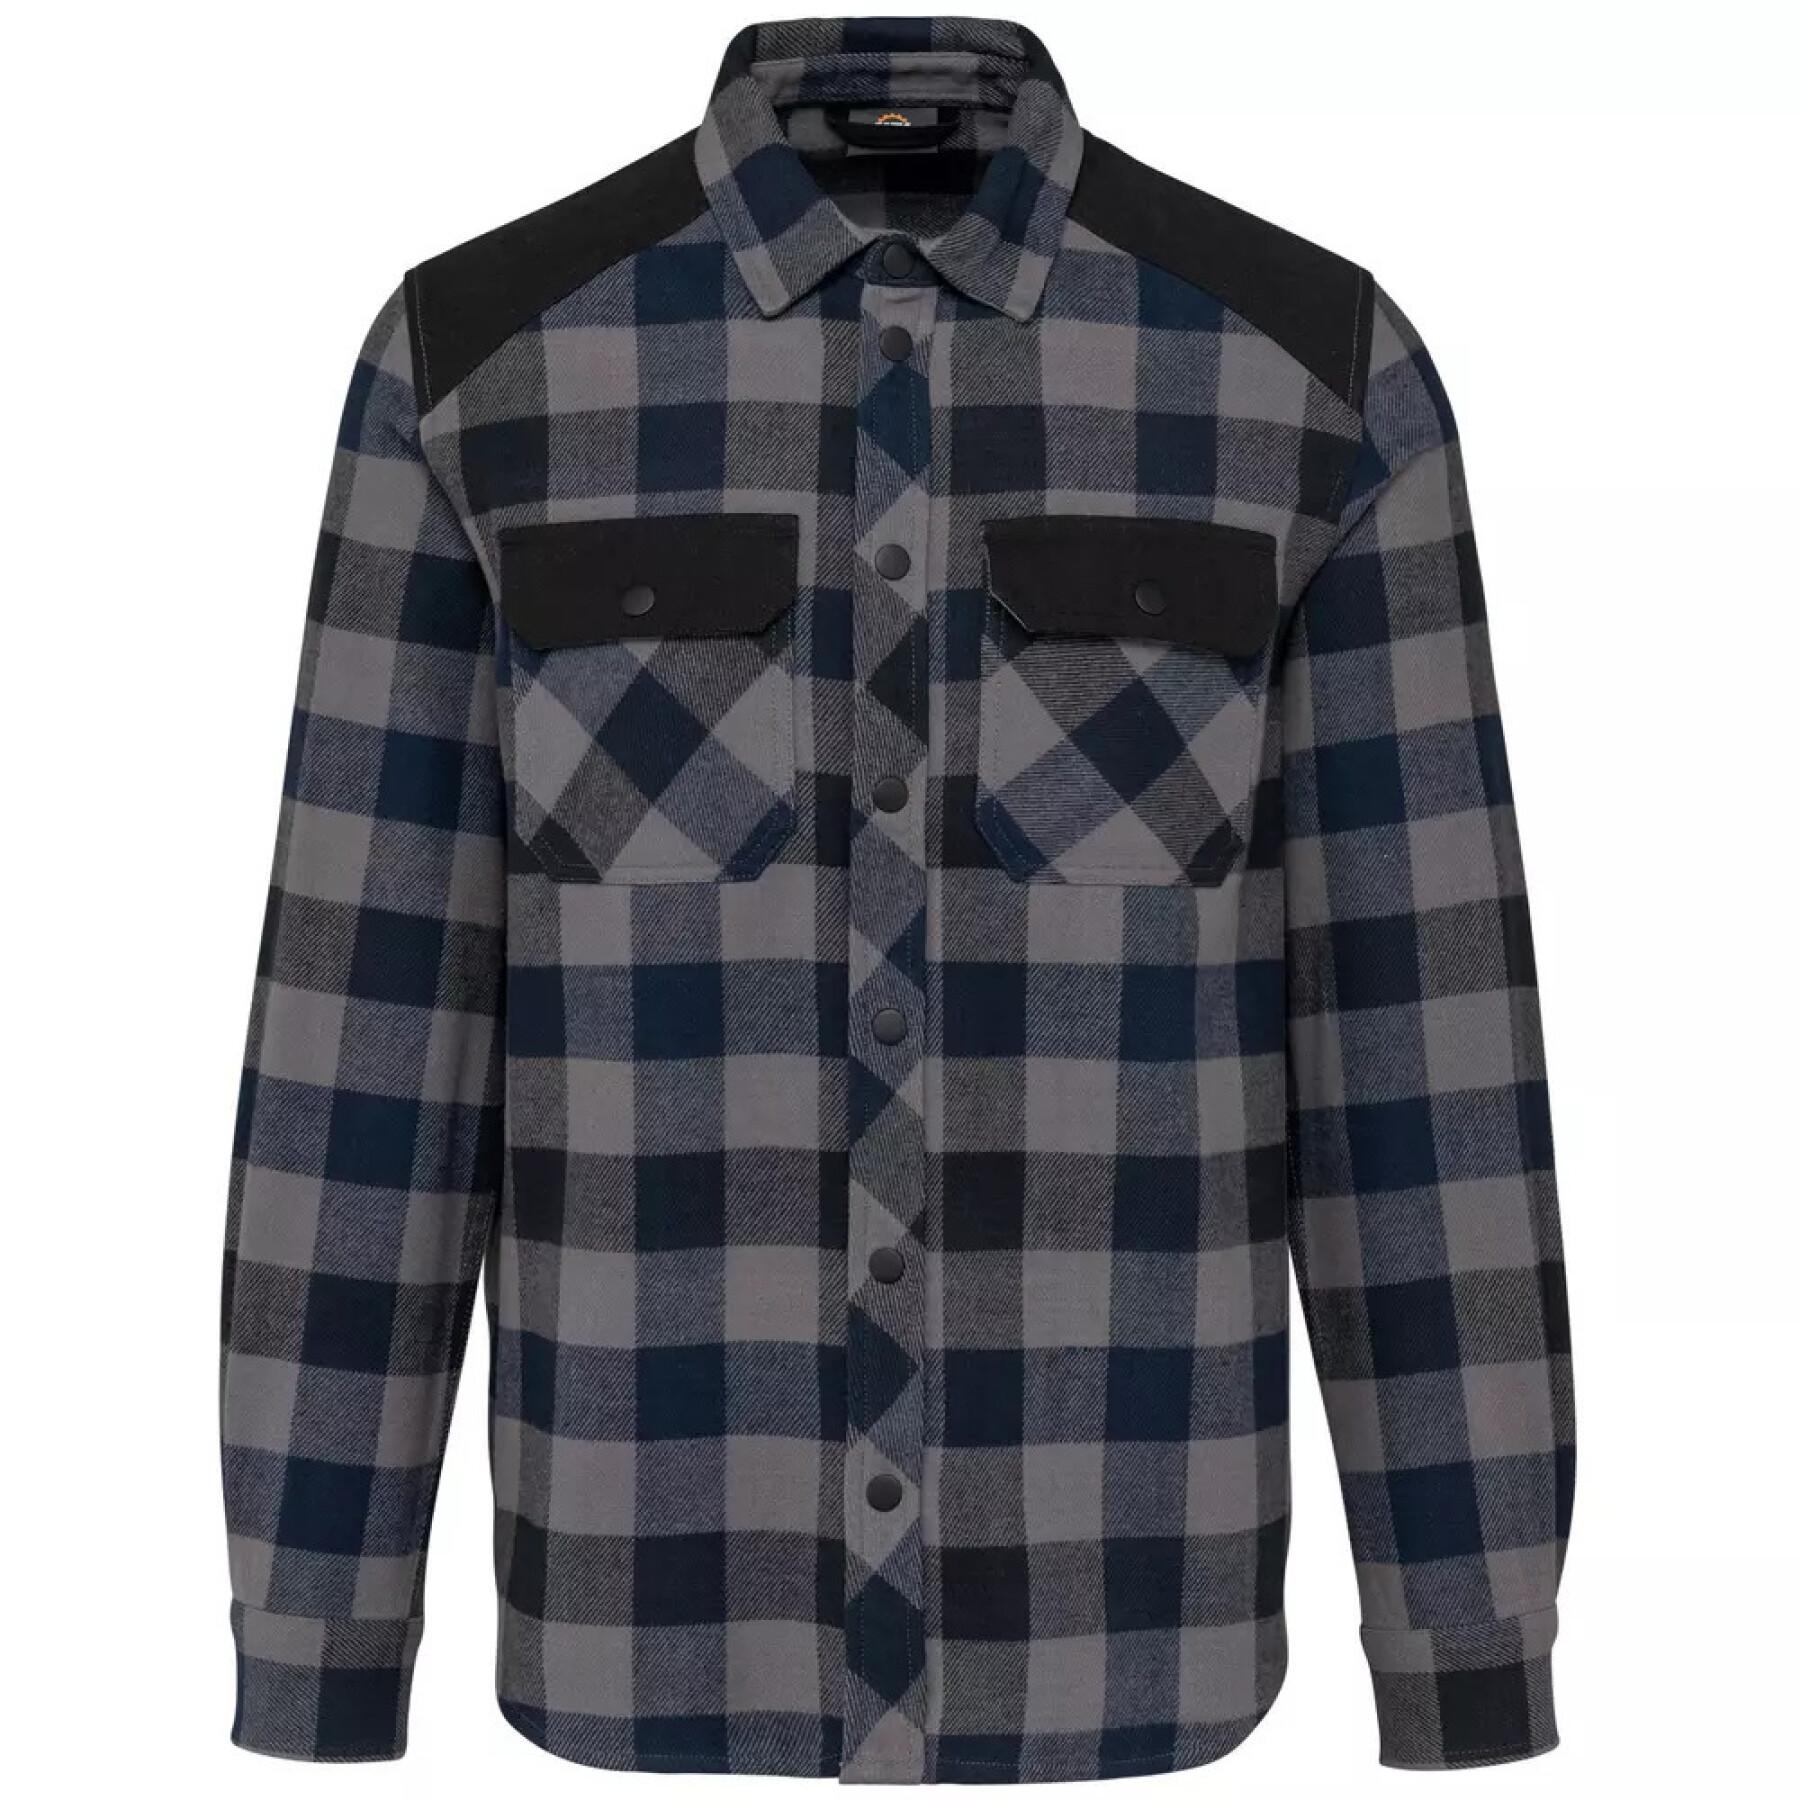 Check shirt with pockets WK. Designed To Work